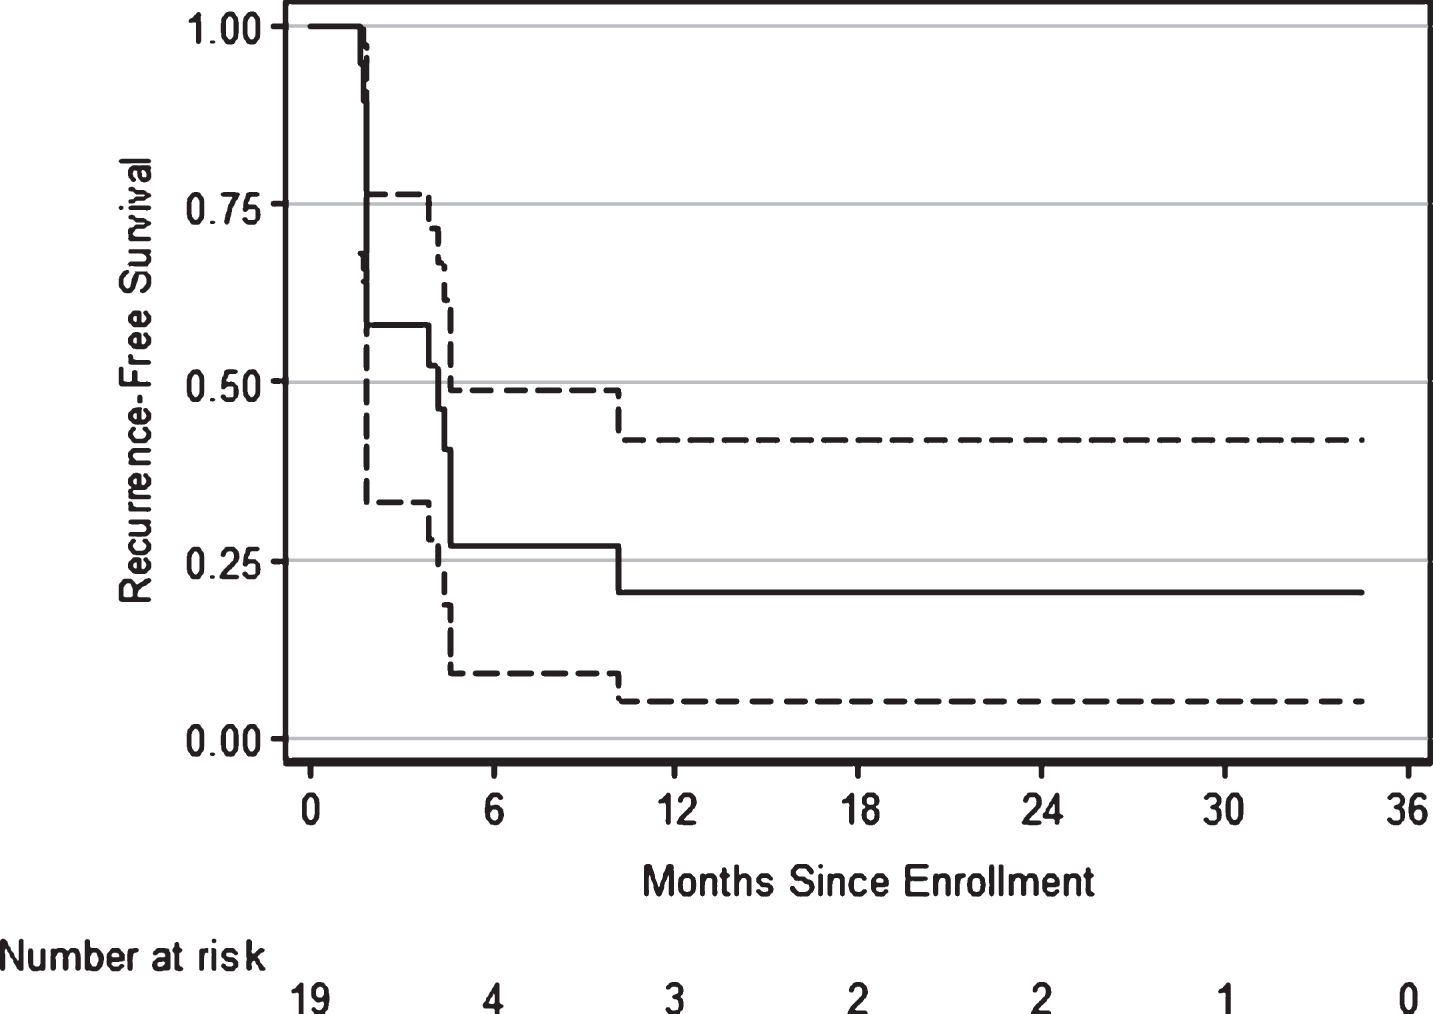 Kaplan-Meier estimates of recurrence-free survival following treatment with everolimus and gemcitabine for bacillus Calmette-Guérin-refractory bladder cancer. At 1 yr, 16% (95% CI 5% – 42%) were disease free.